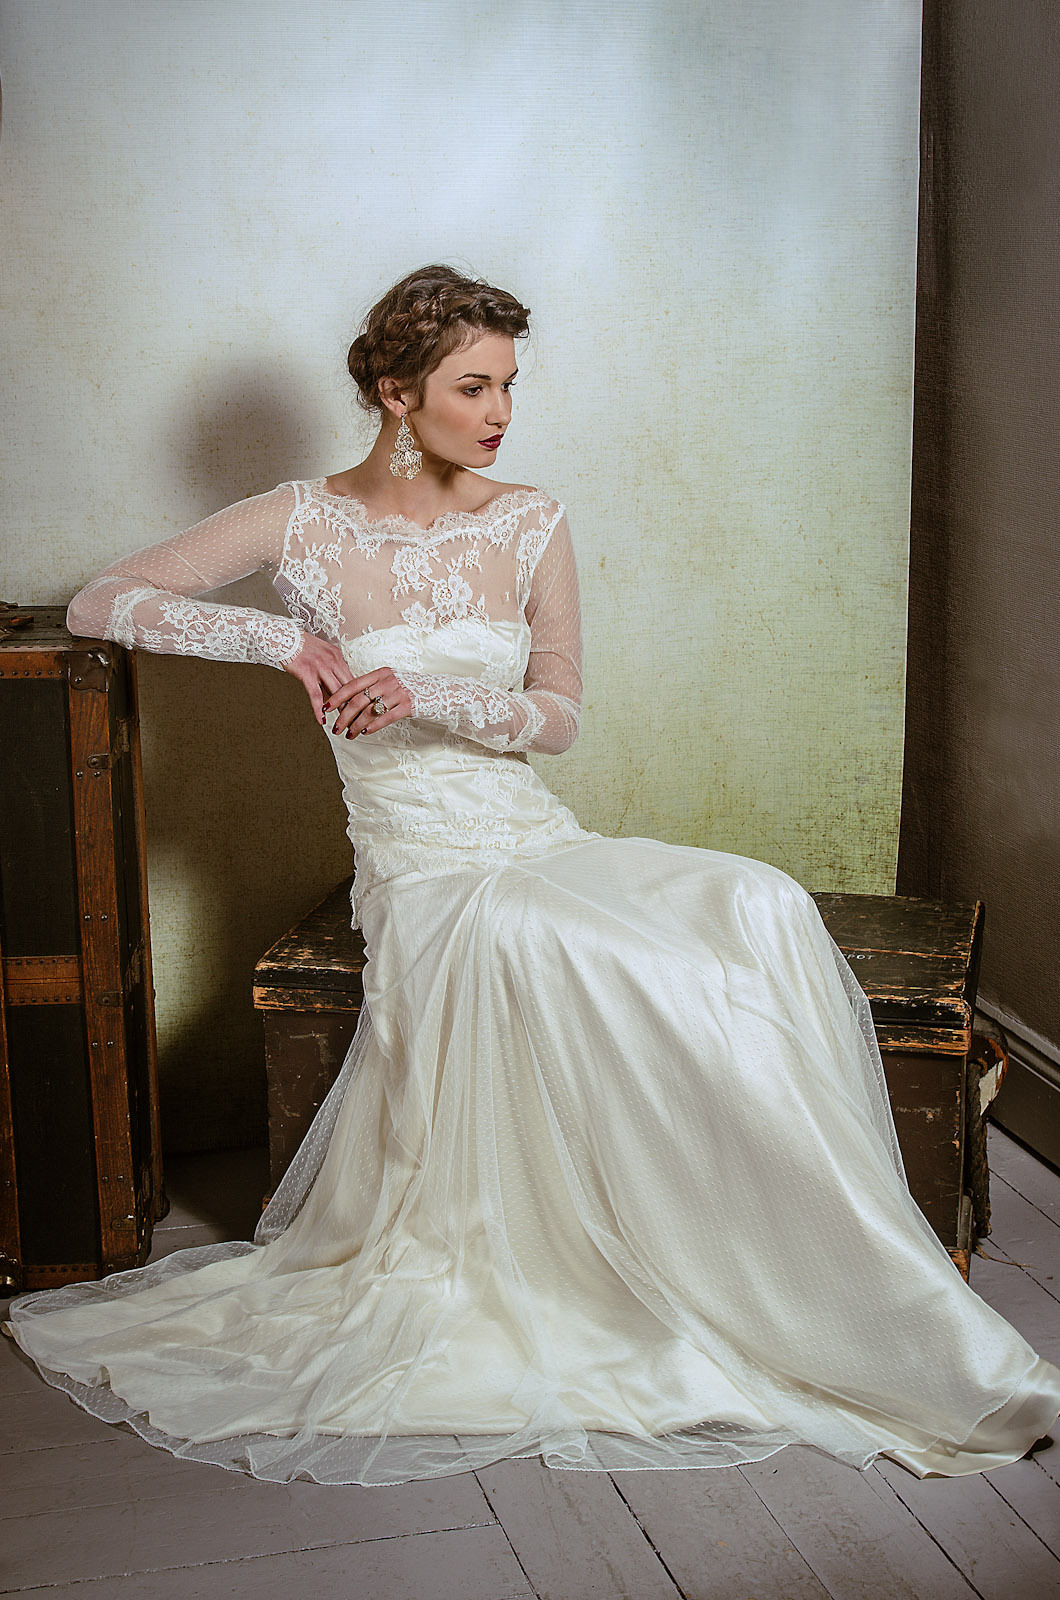 Belle & Bunty's 2014 Bridal Capsule Collection